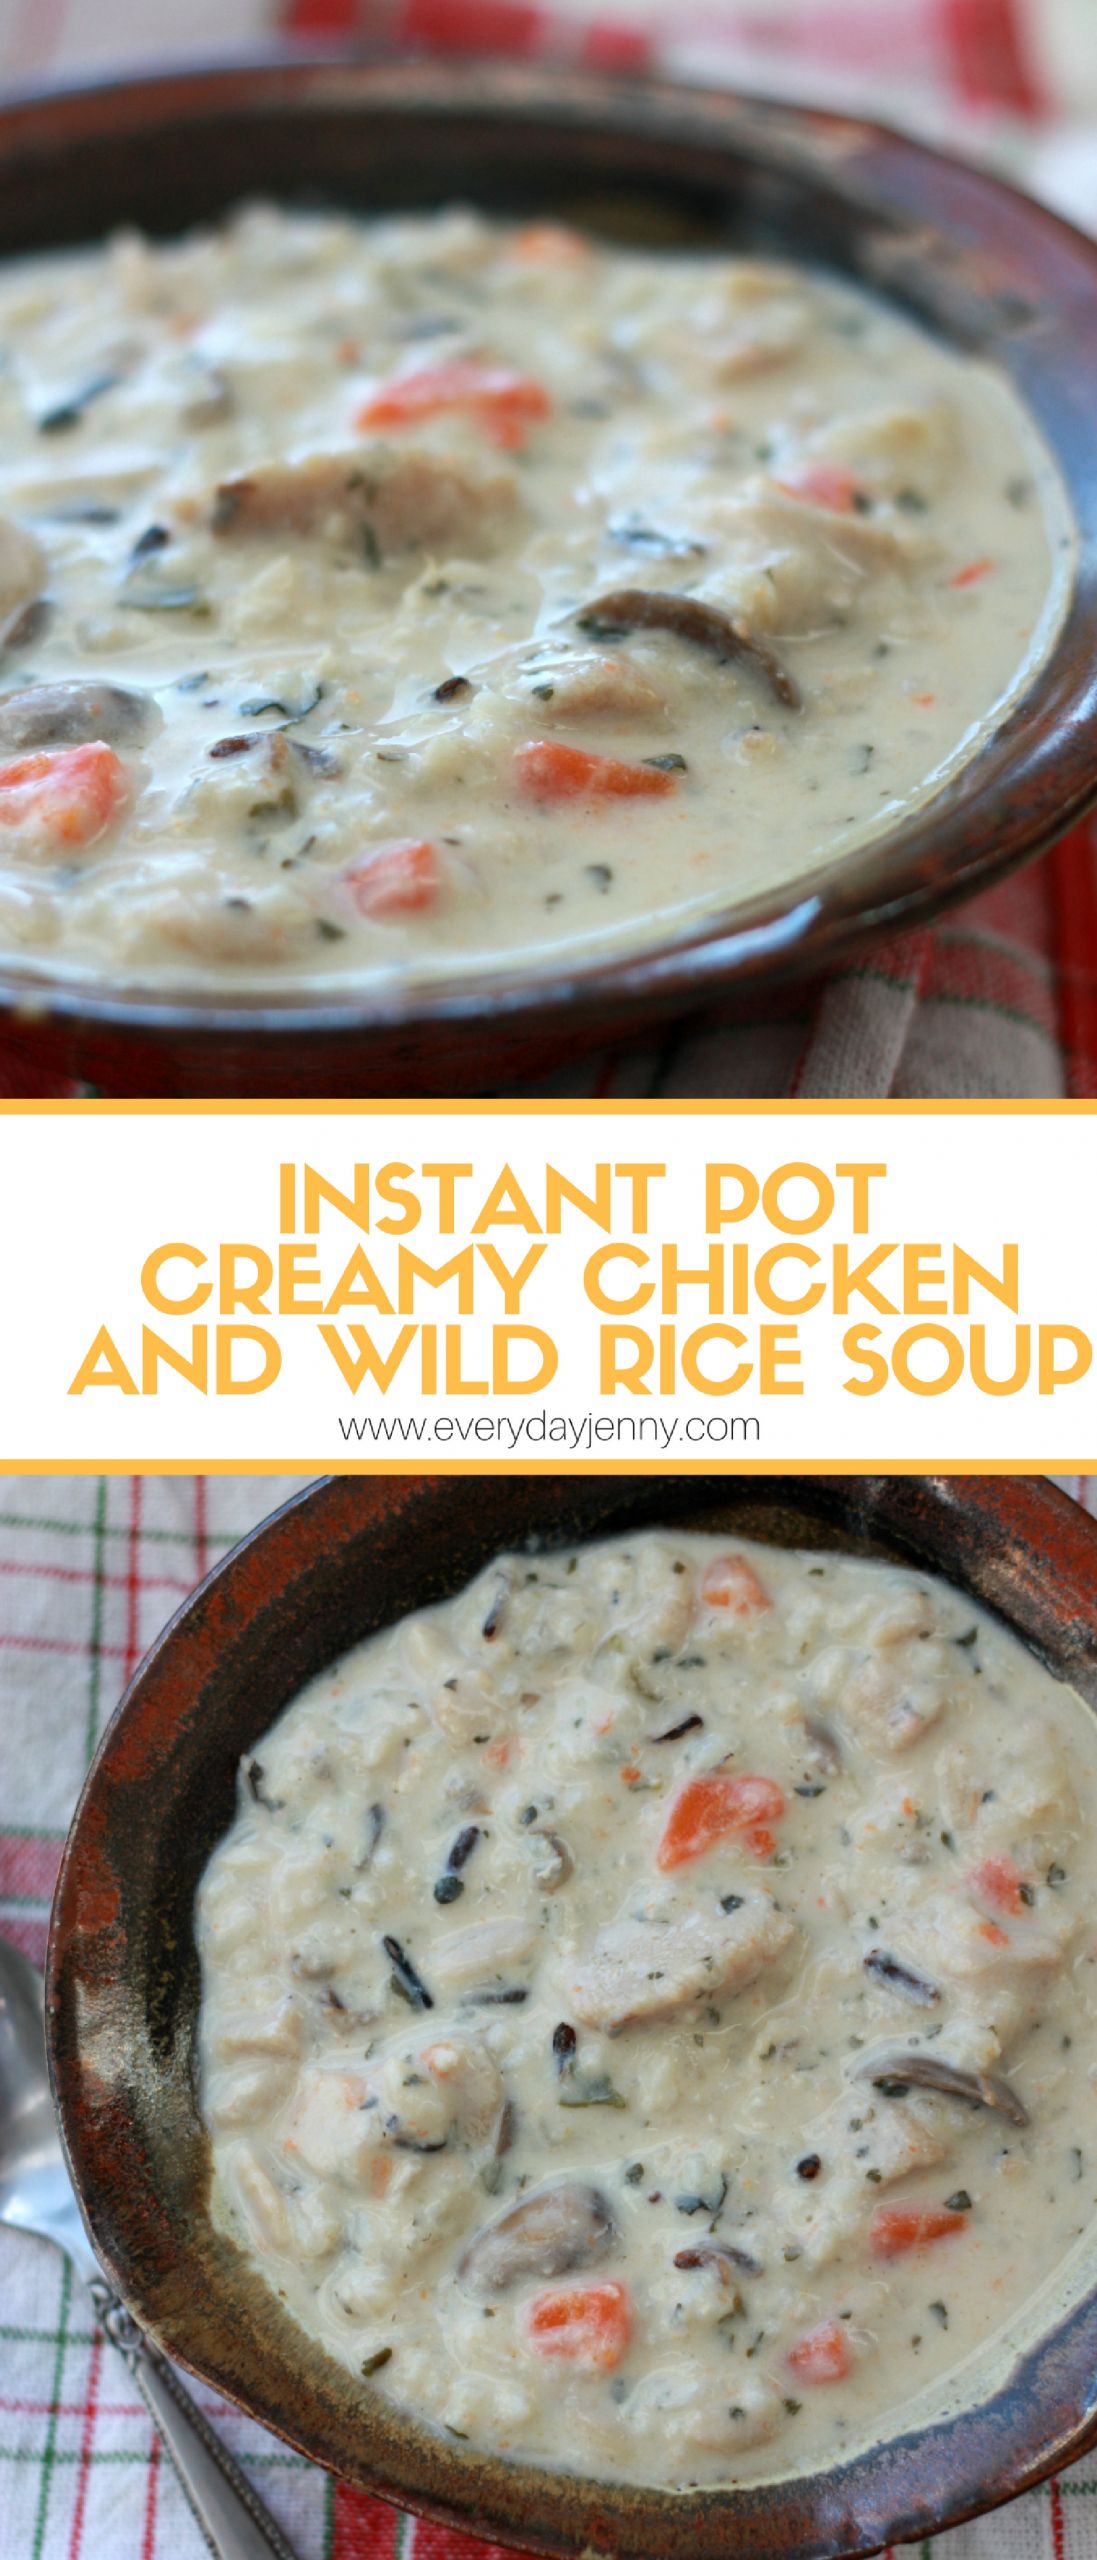 Instant Pot Chicken With Cream Of Chicken Soup
 INSTANT POT CREAMY CHICKEN AND WILD RICE SOUP